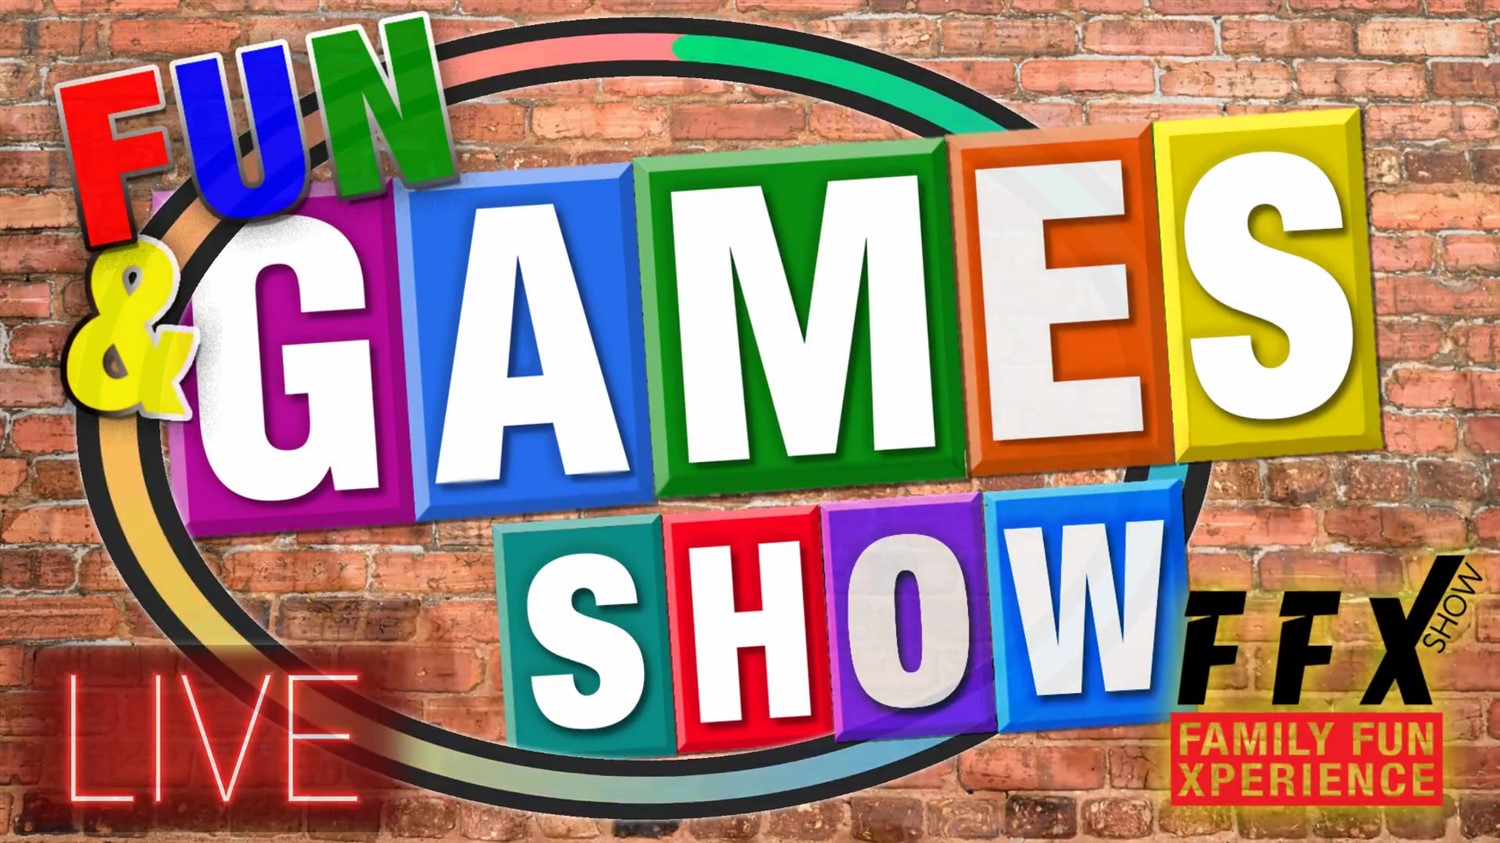 FUN & GAMES SHOW! 5 Star Fun for the whole family! on Mar 02, 19:00@FFX Theatre - Buy tickets and Get information on Family Fun Xperience tickets.ffxshow.org